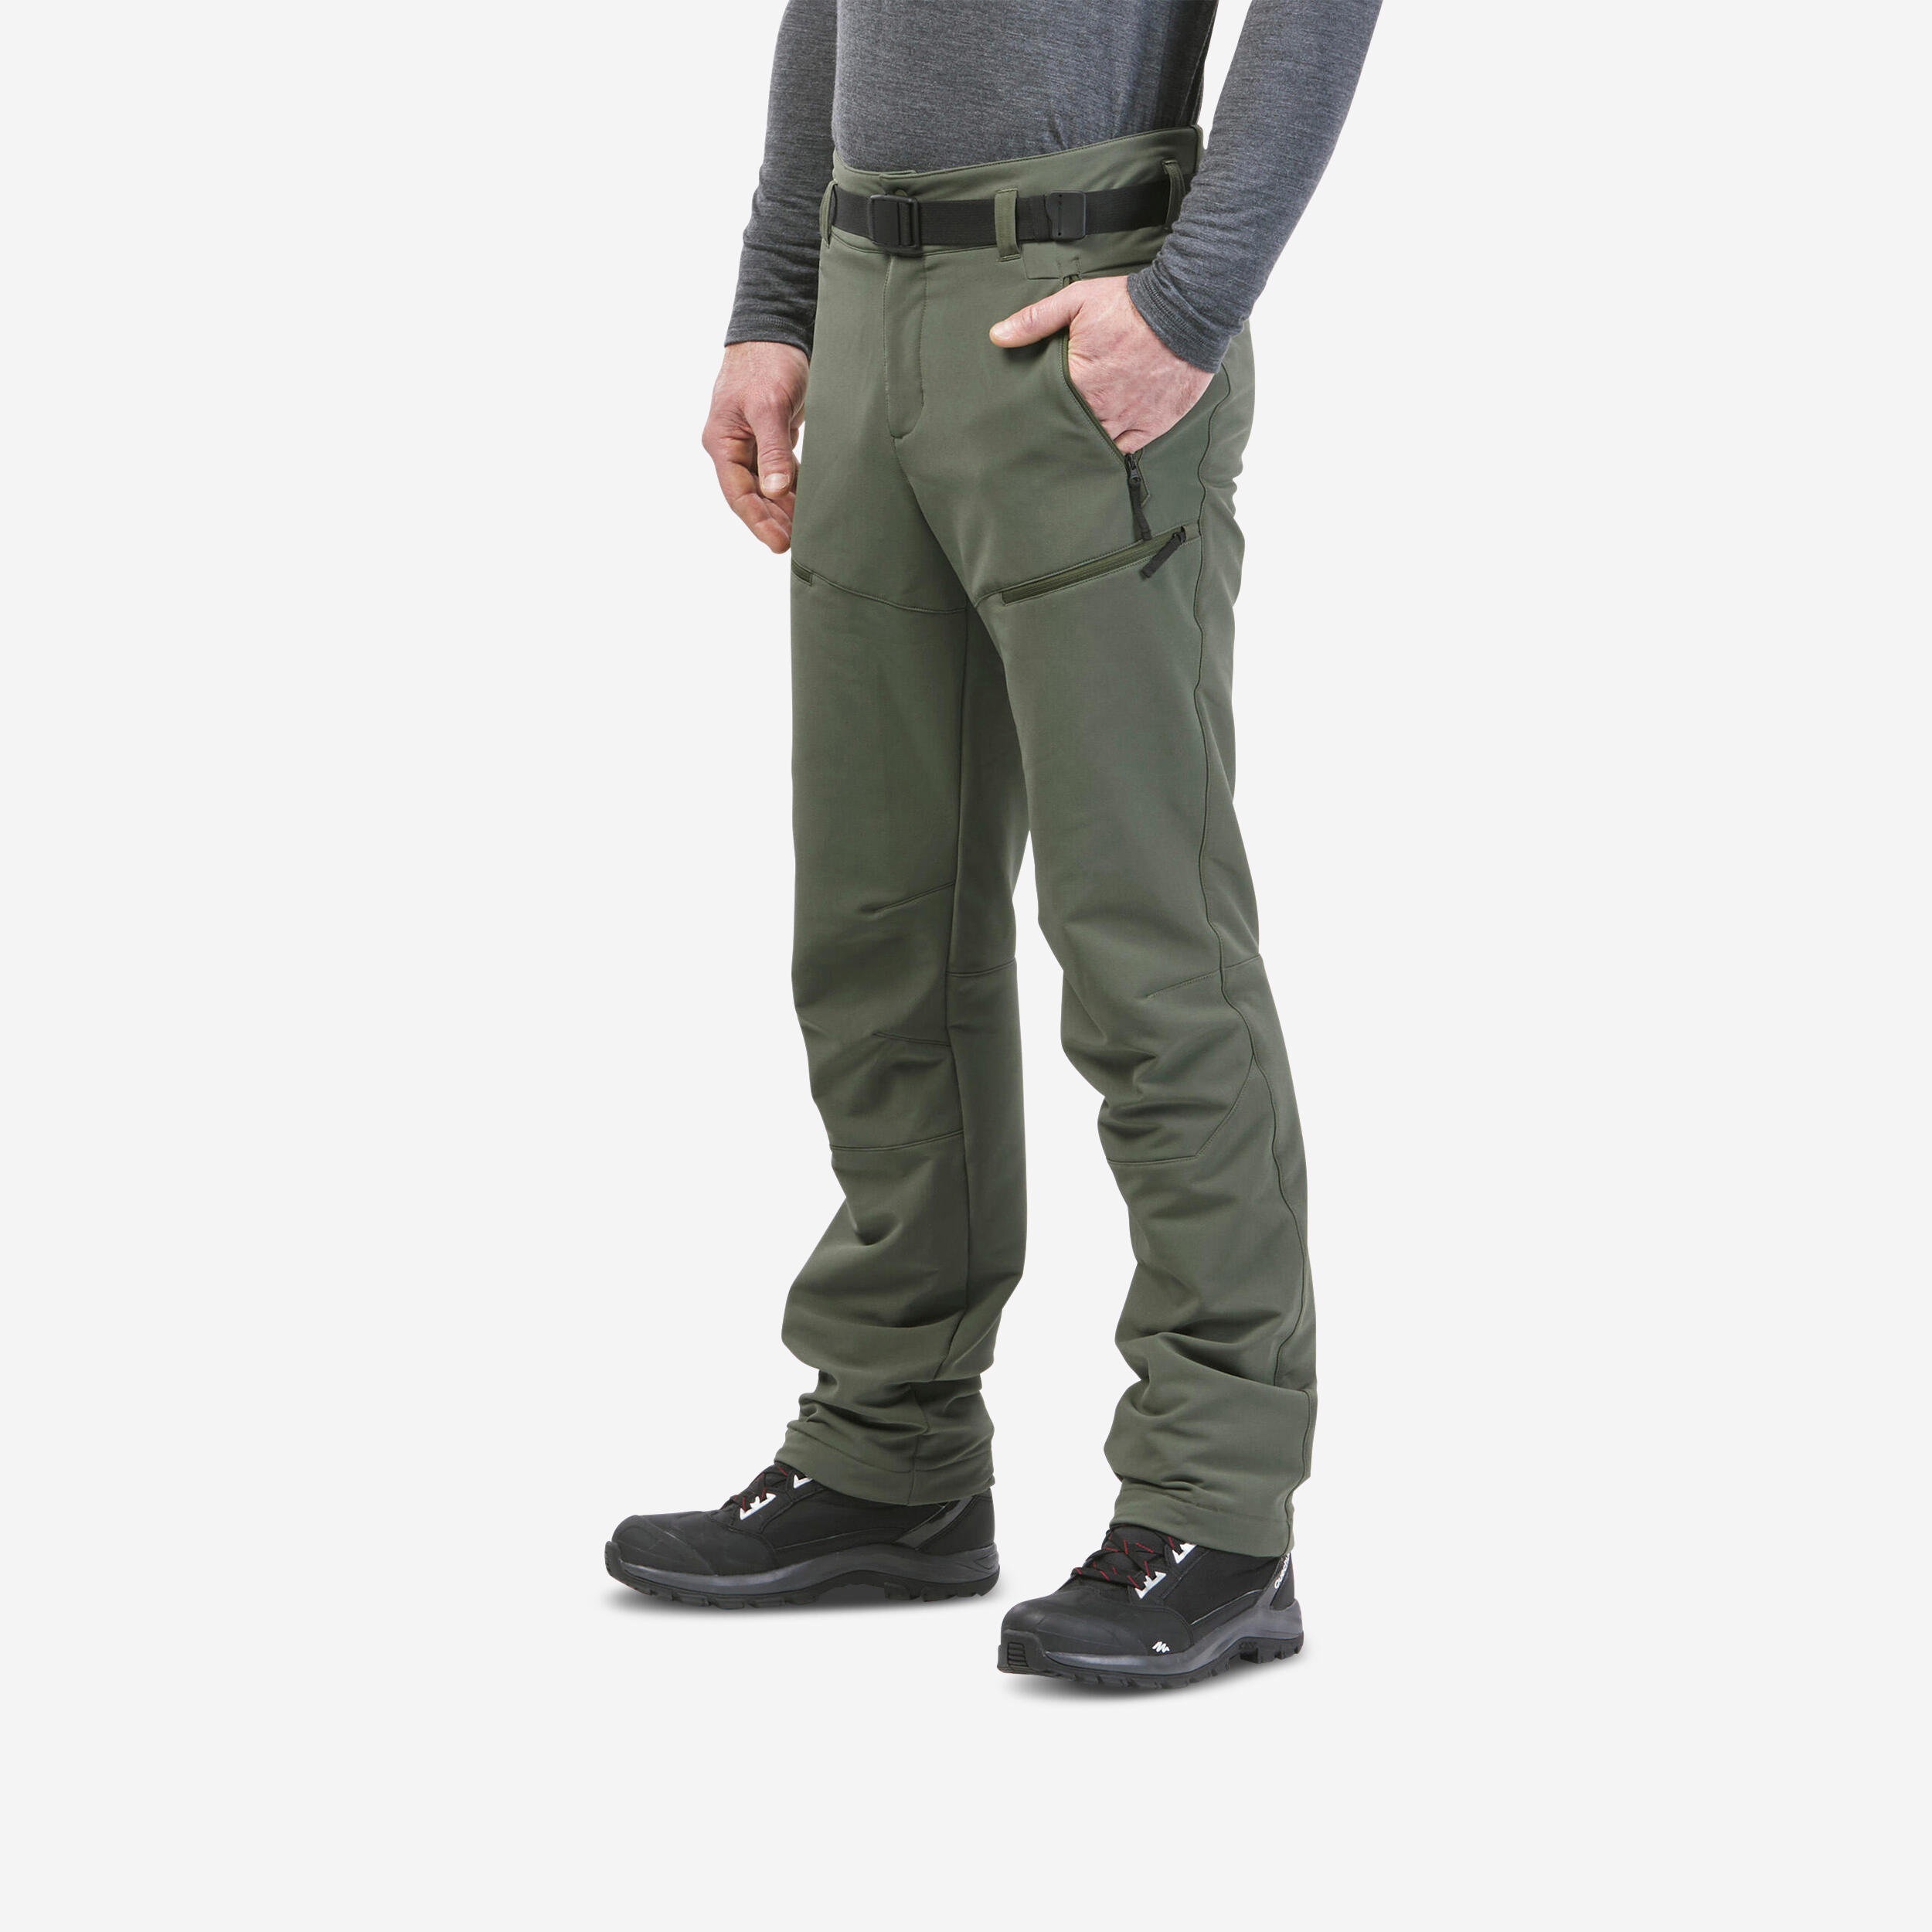 MEN'S WARM WATER-REPELLENT SNOW HIKING TROUSERS - SH500 MOUNTAIN  1/8